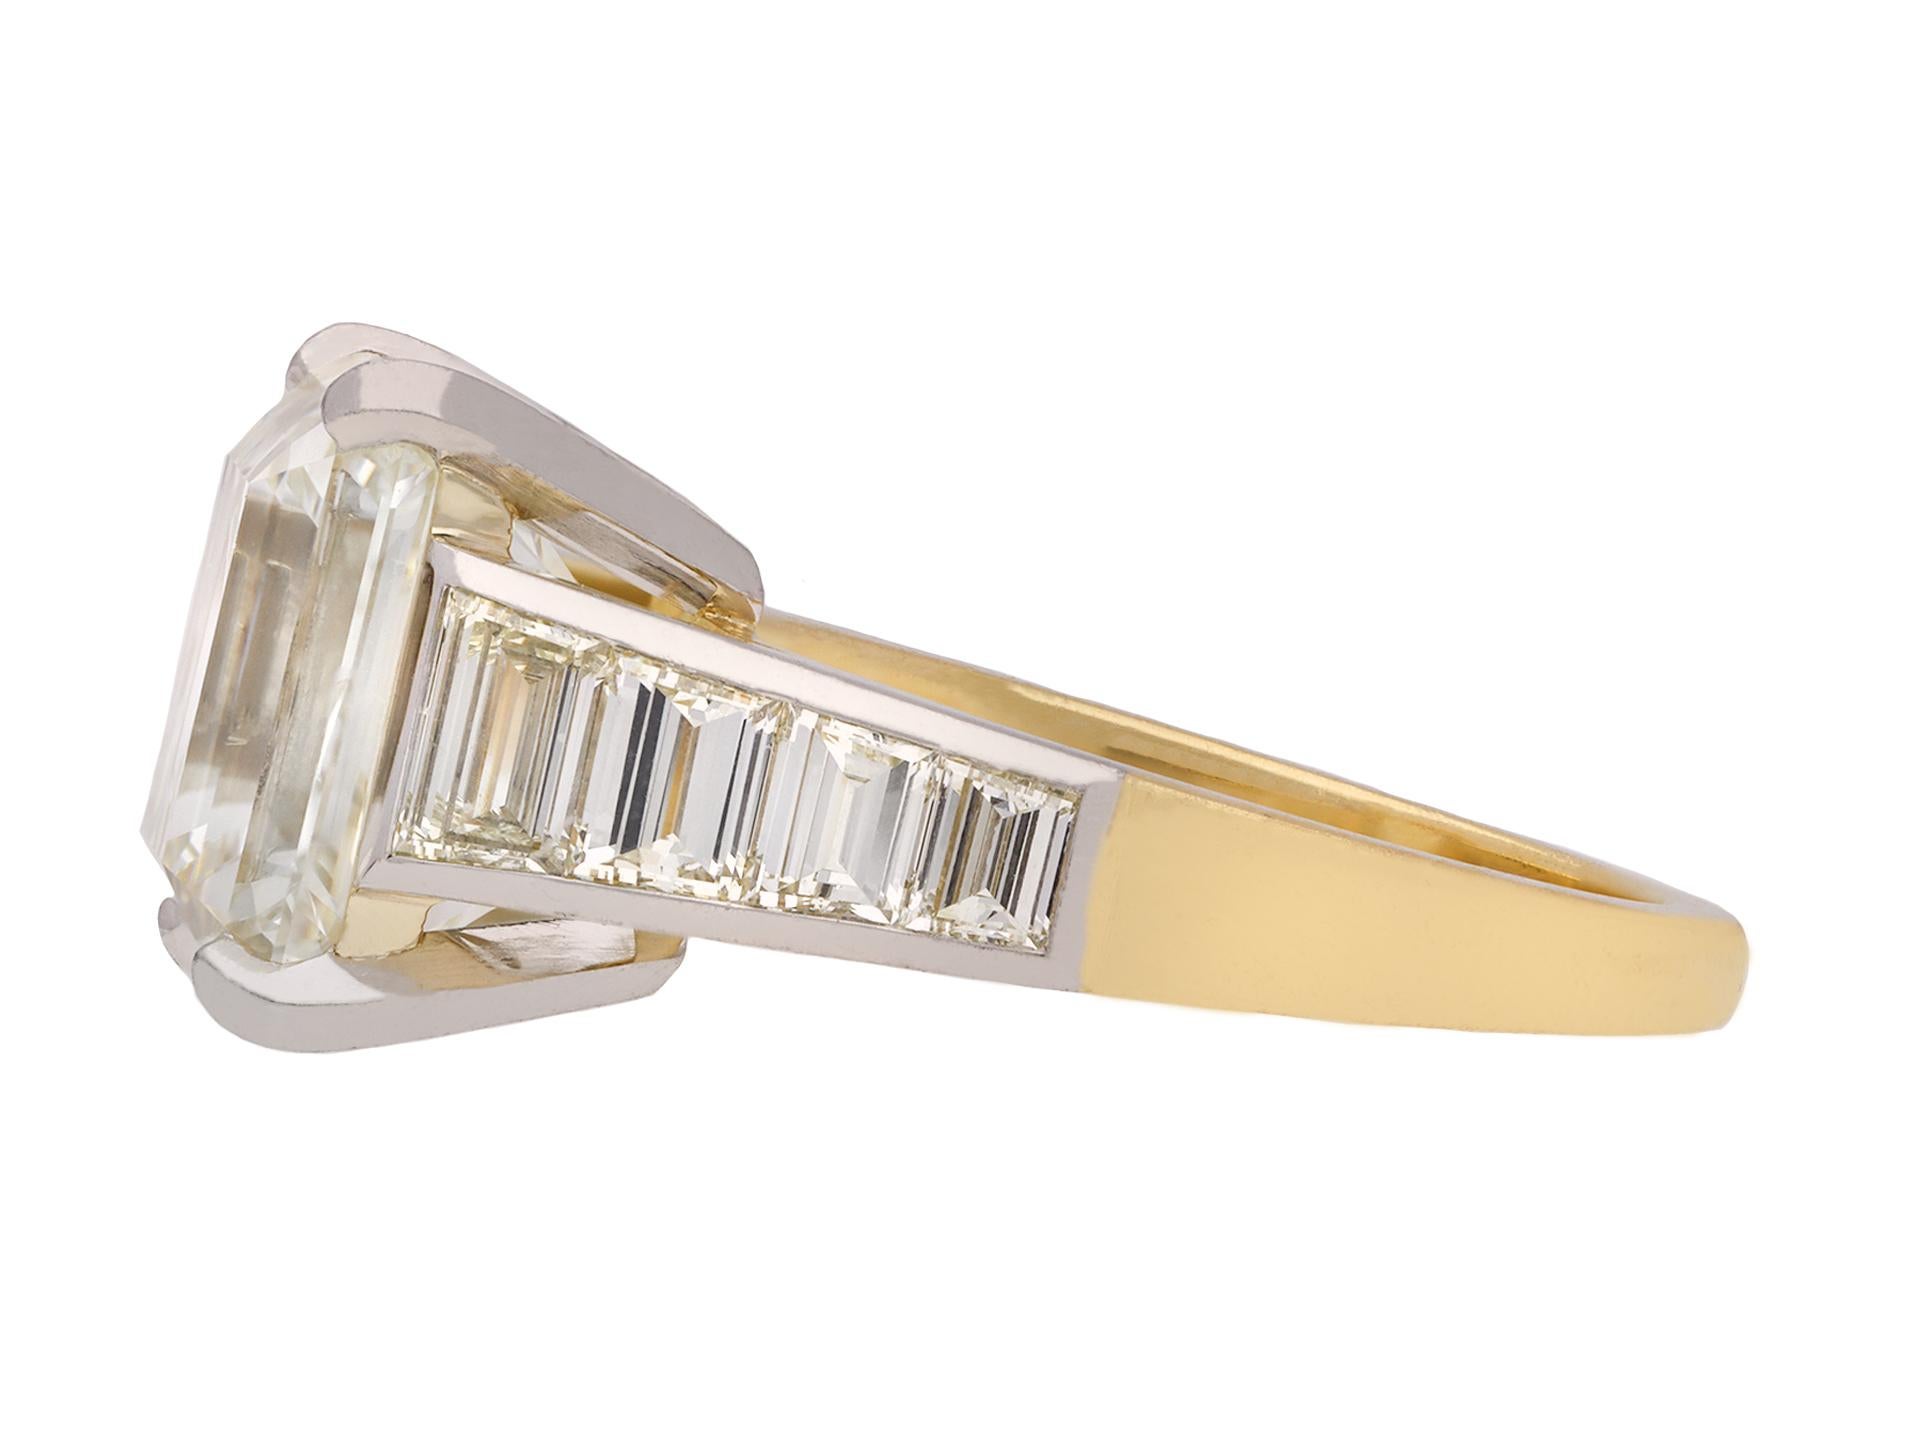 Emerald-cut diamond flanked solitaire ring. Centrally set with an octagonal emerald-cut diamond, N colour, VS2 clarity, with a weight of 6.95 carats in an open back four claw setting, flanked by eight tapered baguette diamonds in open back half